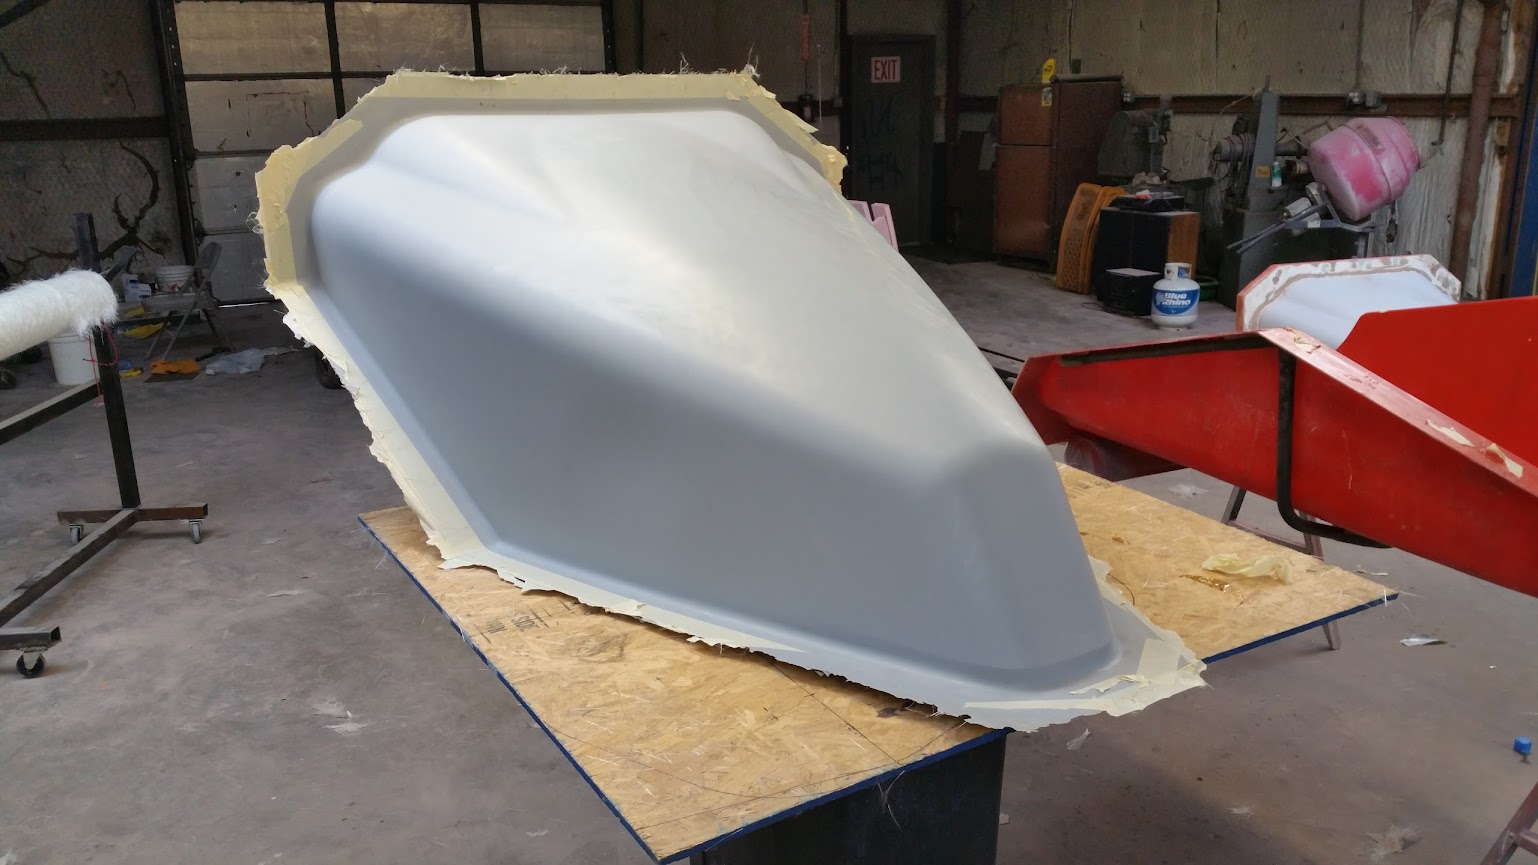 Nose free from the mold